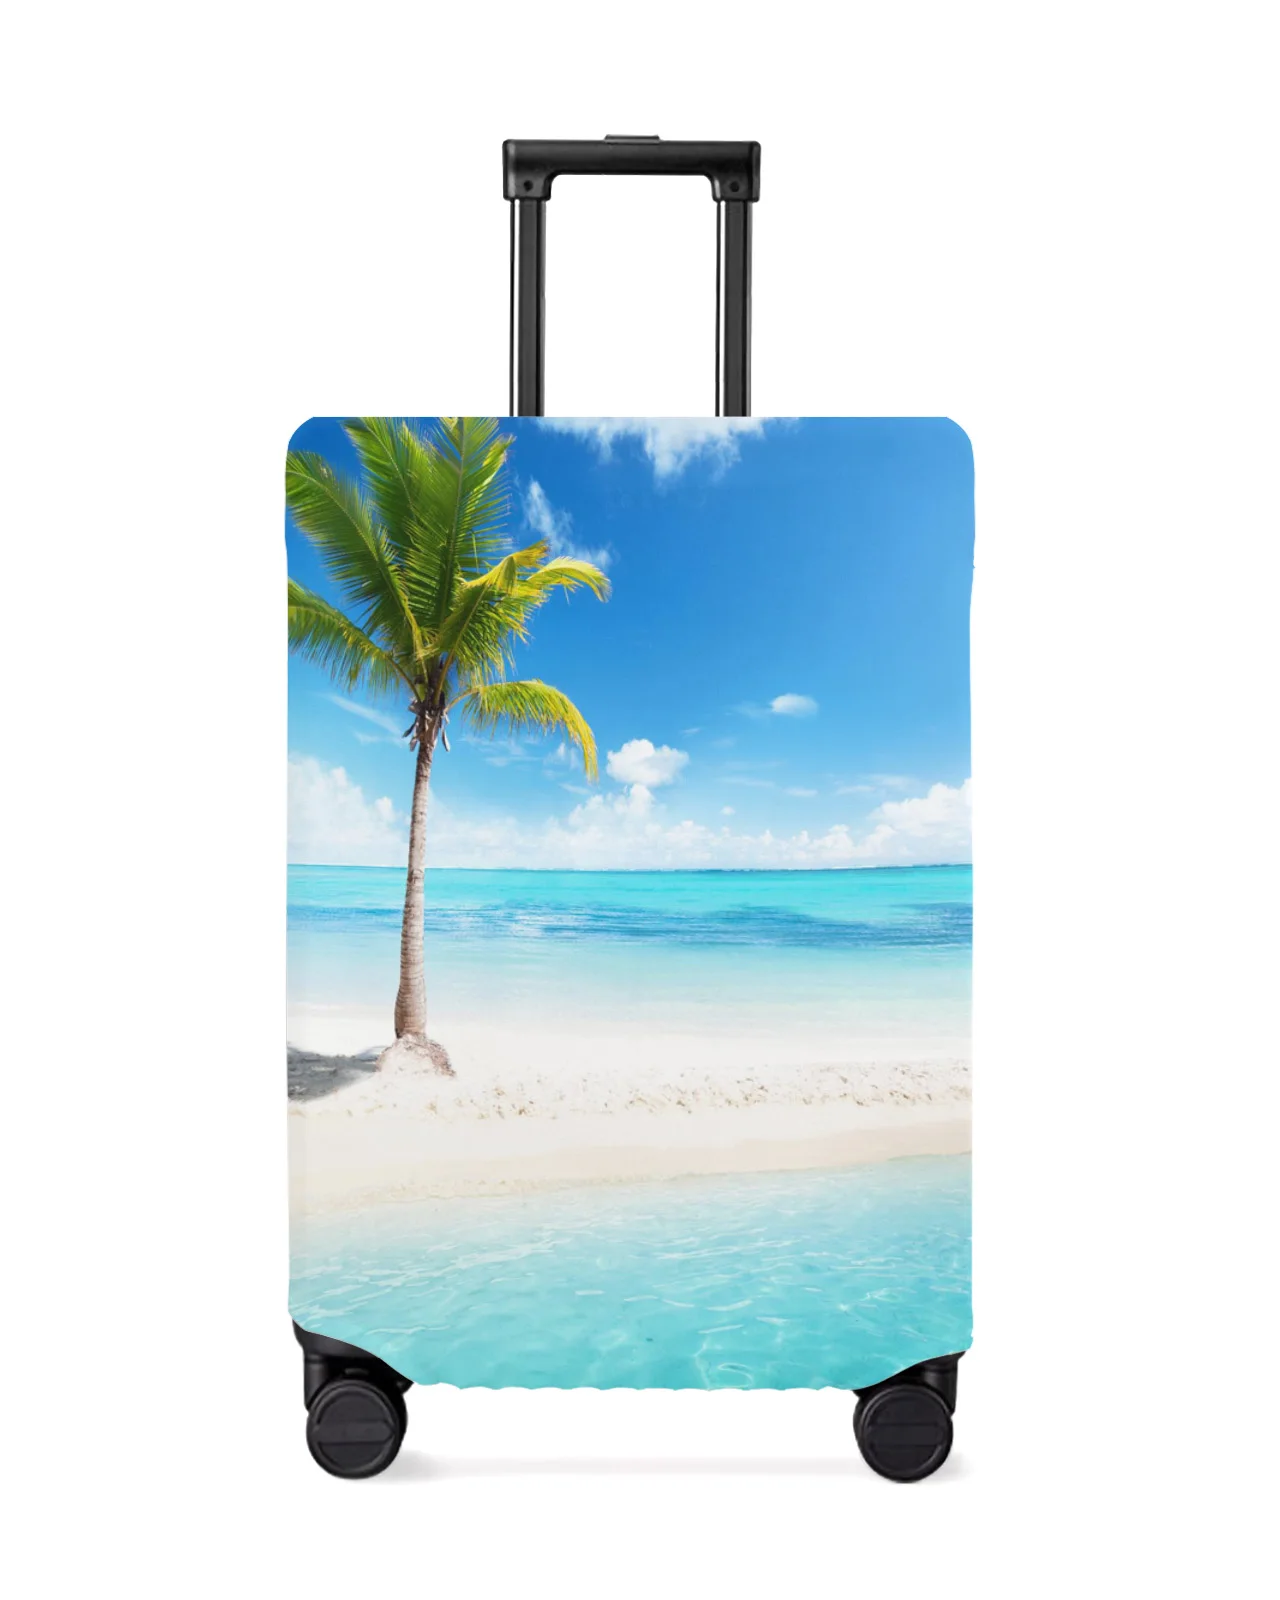 

Palm Tree Sea Beach Blue Sky White Clouds Travel Luggage Cover Elastic Baggage Cover Suitcase Case Dust Cover Travel Accessories